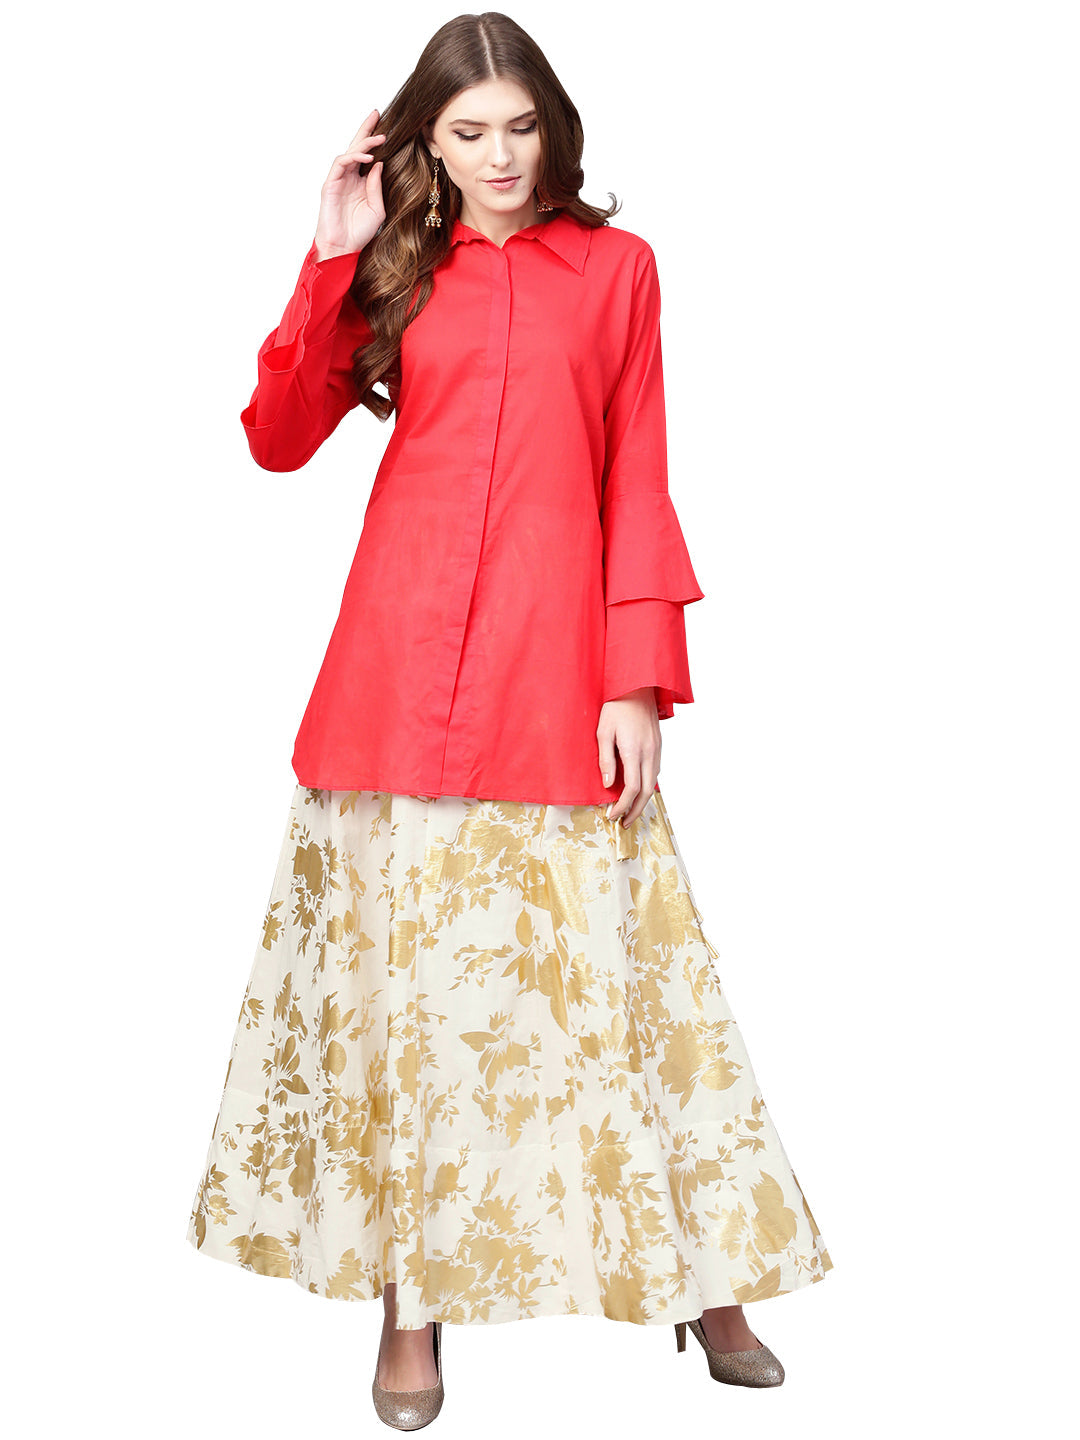 Ahalyaa Indowestern Red Shirt With Off White & Gold Skirt Set